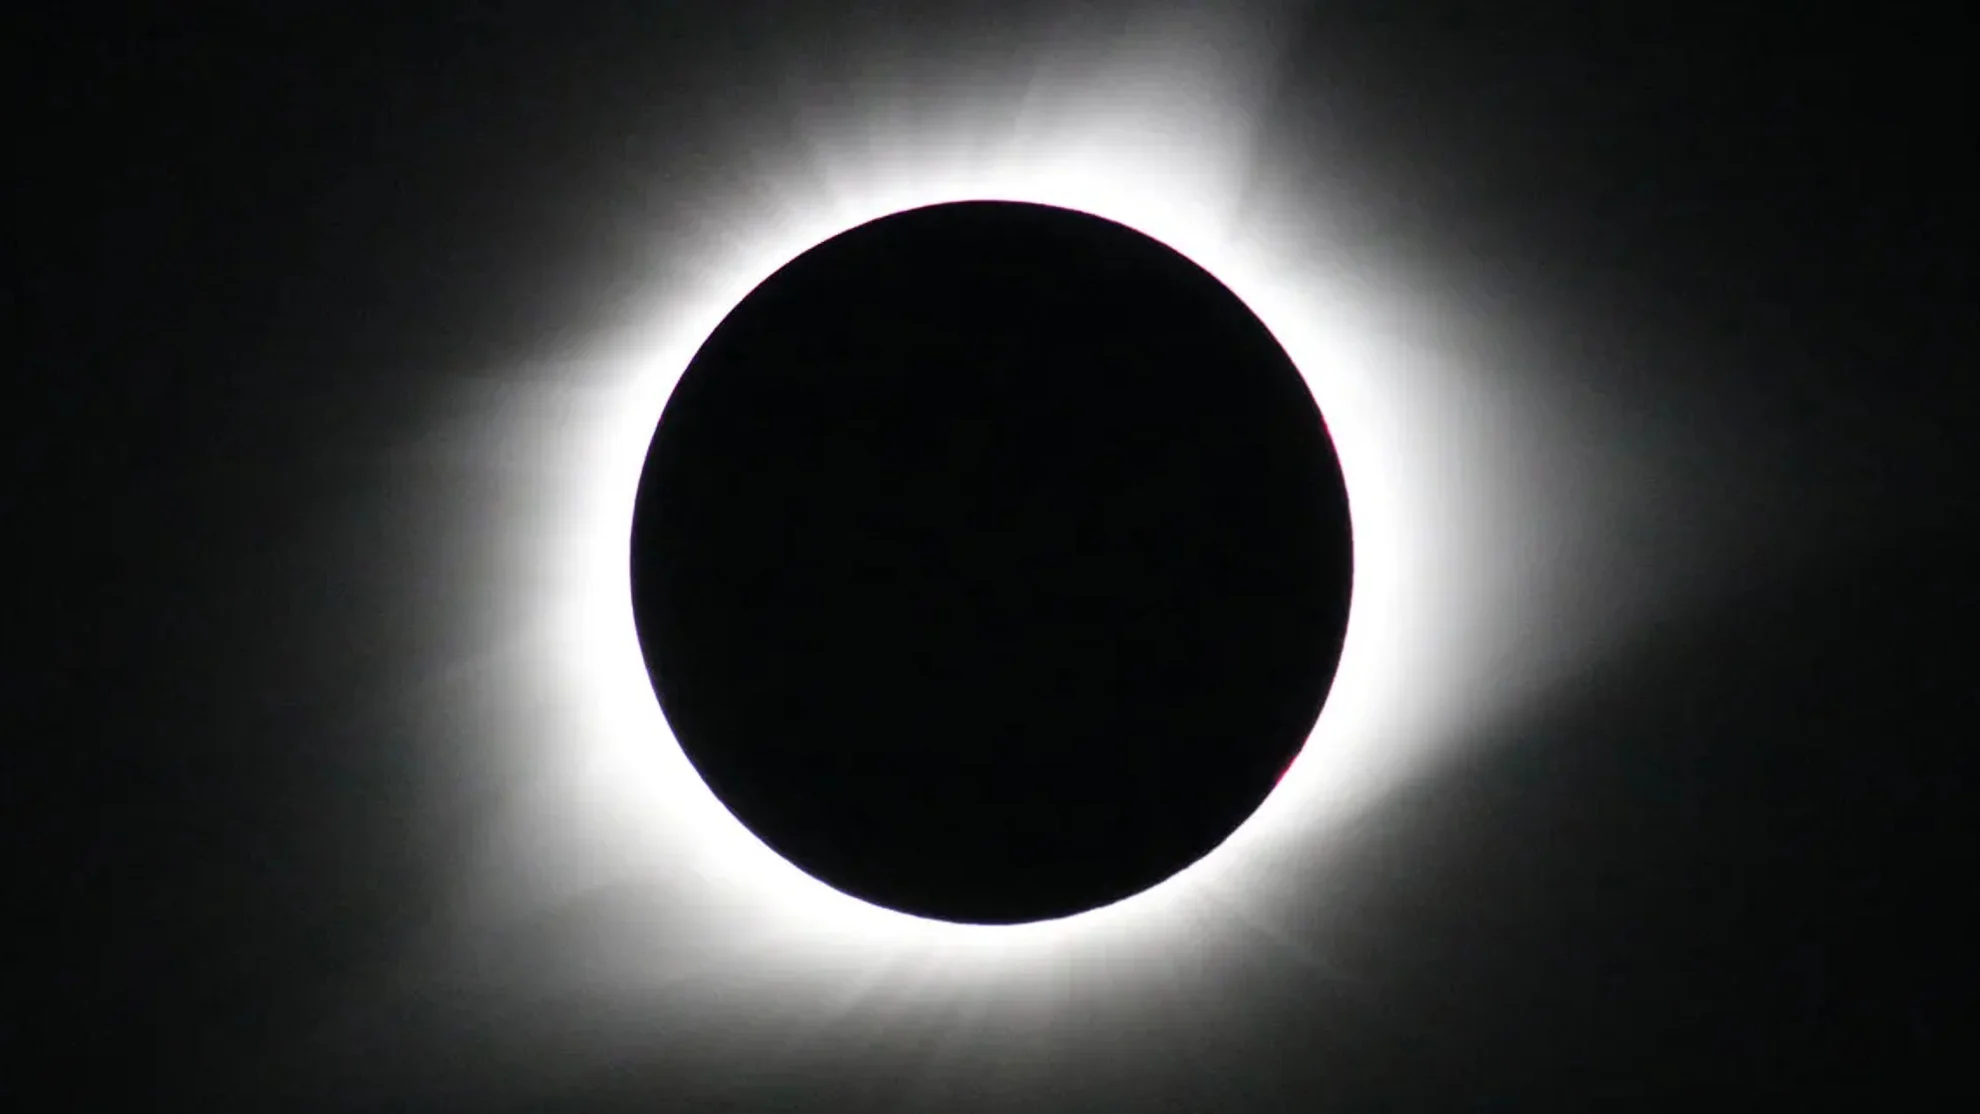 Total solar eclipses are an opportunity to engage with science, culture, history